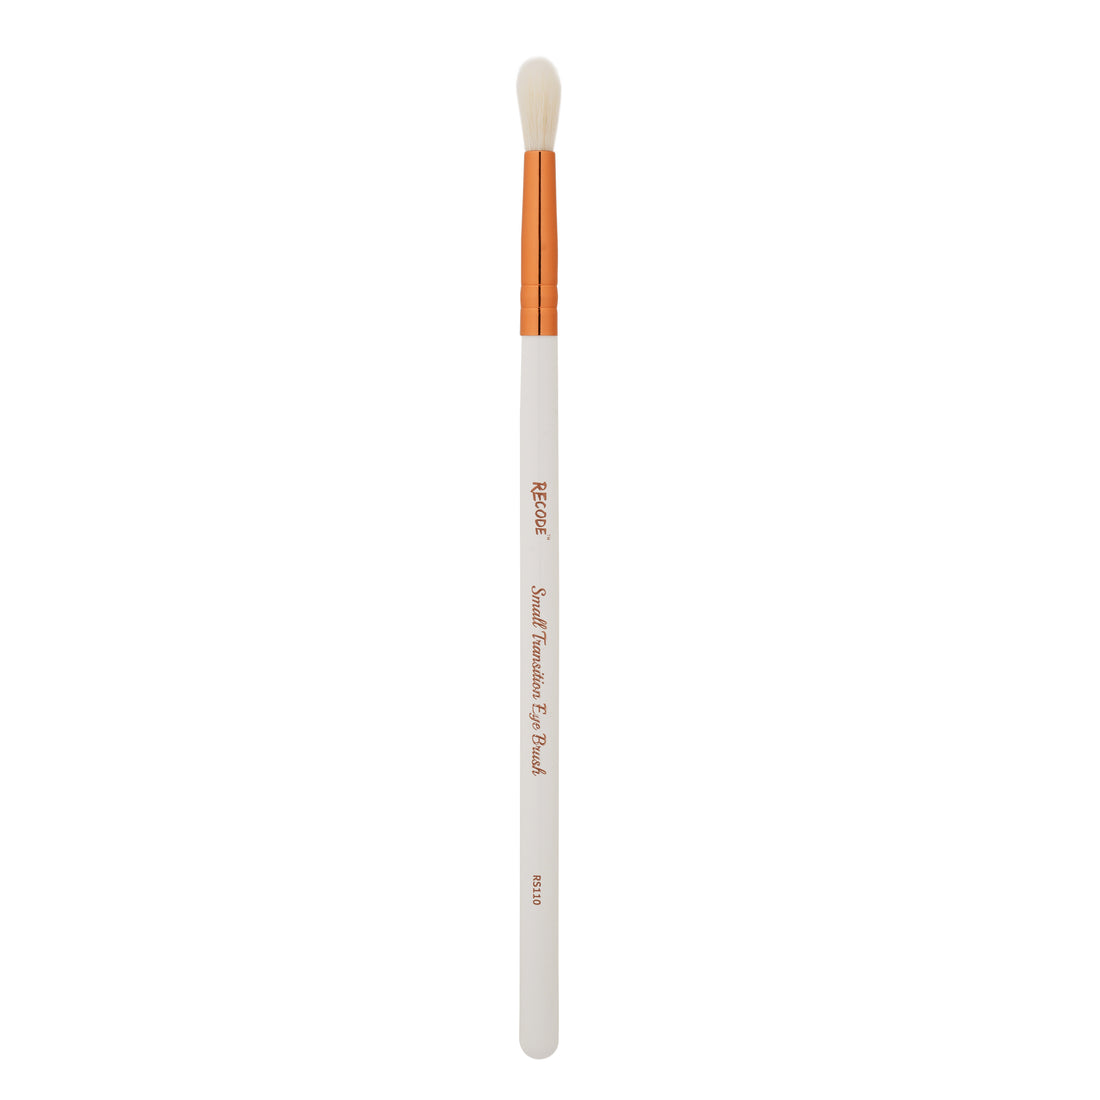 RS 110 SMALL TRANSITION EYE BRUSH - RECODE RS 110